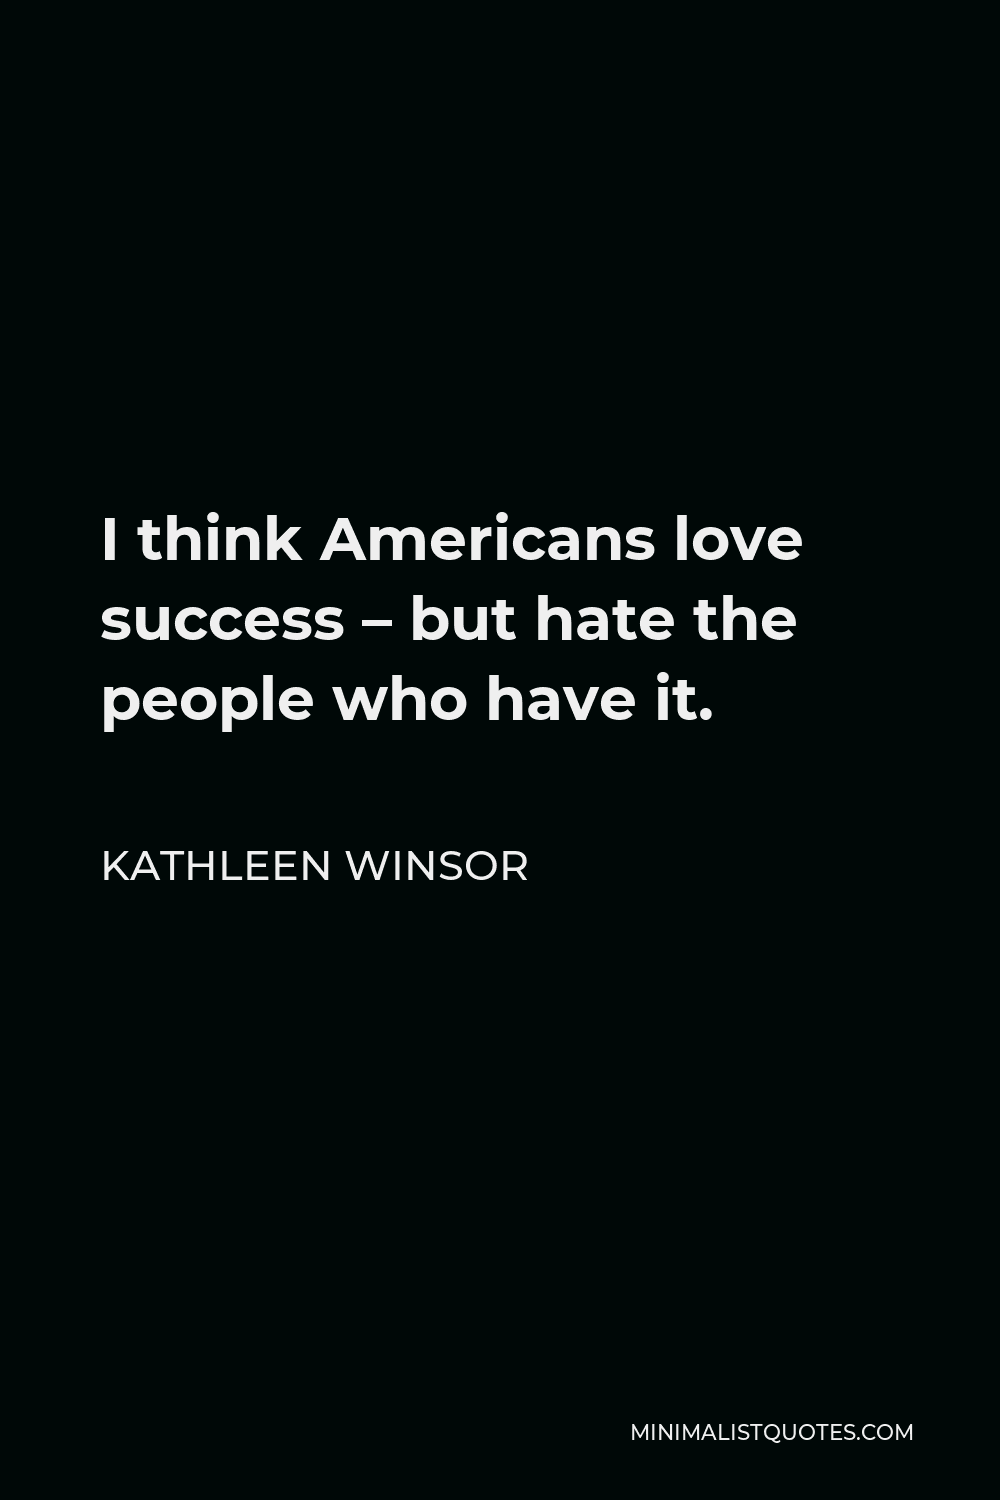 Kathleen Winsor Quote - I think Americans love success – but hate the people who have it.